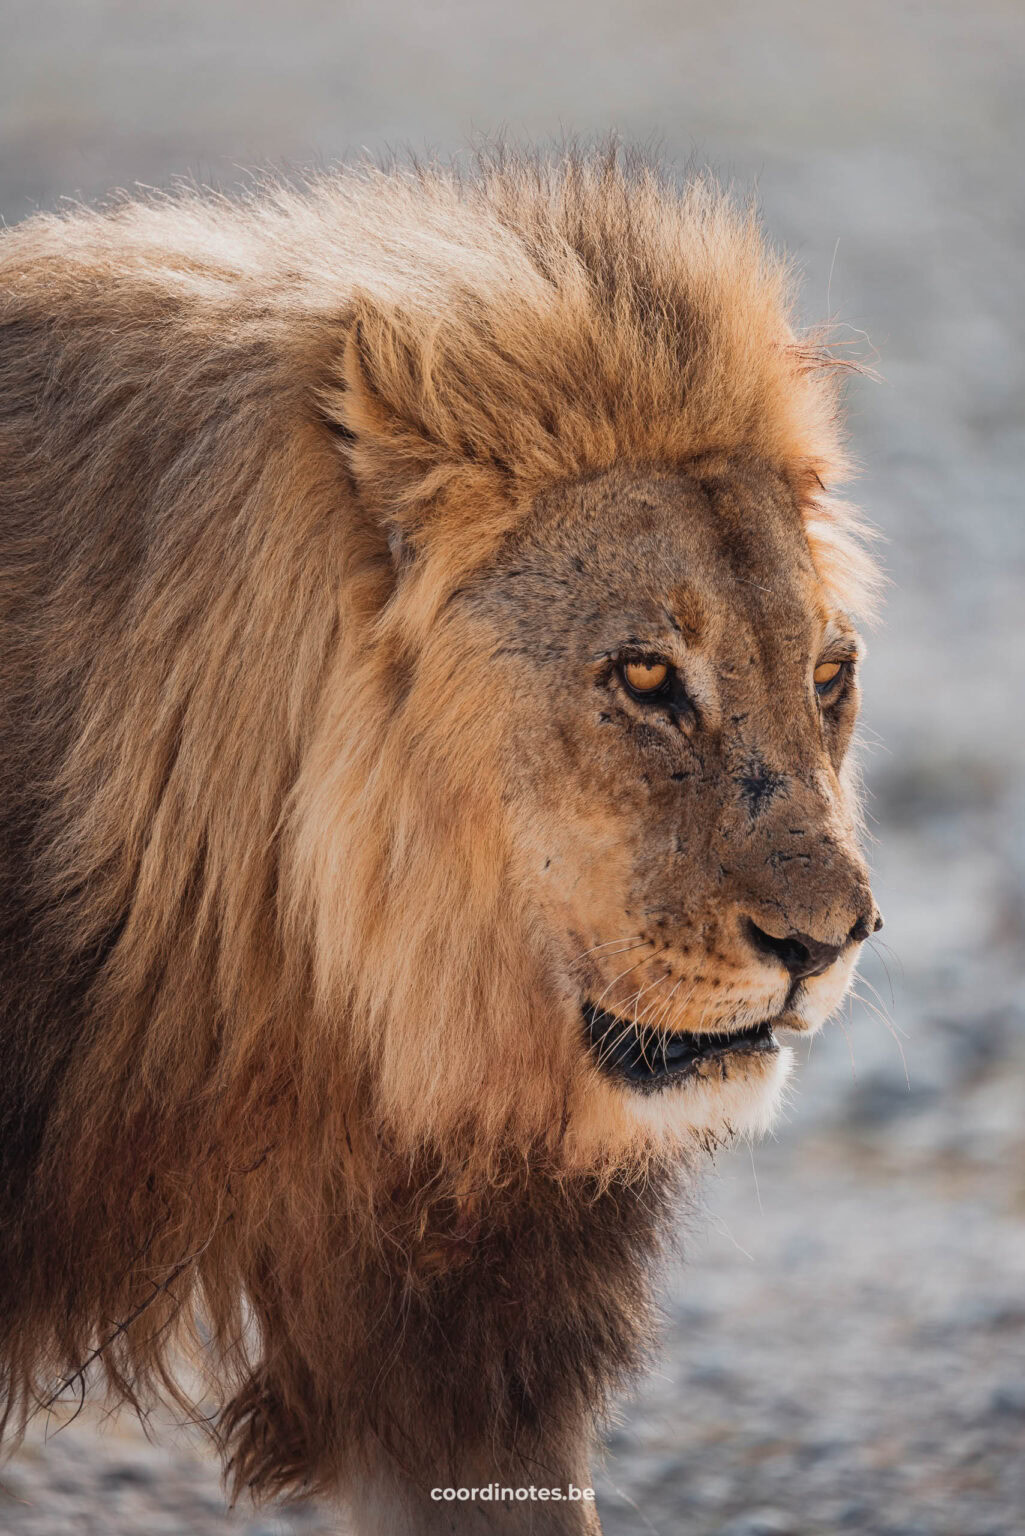 There are approximately 750 lions in Etosha, ideal to go looking for them!